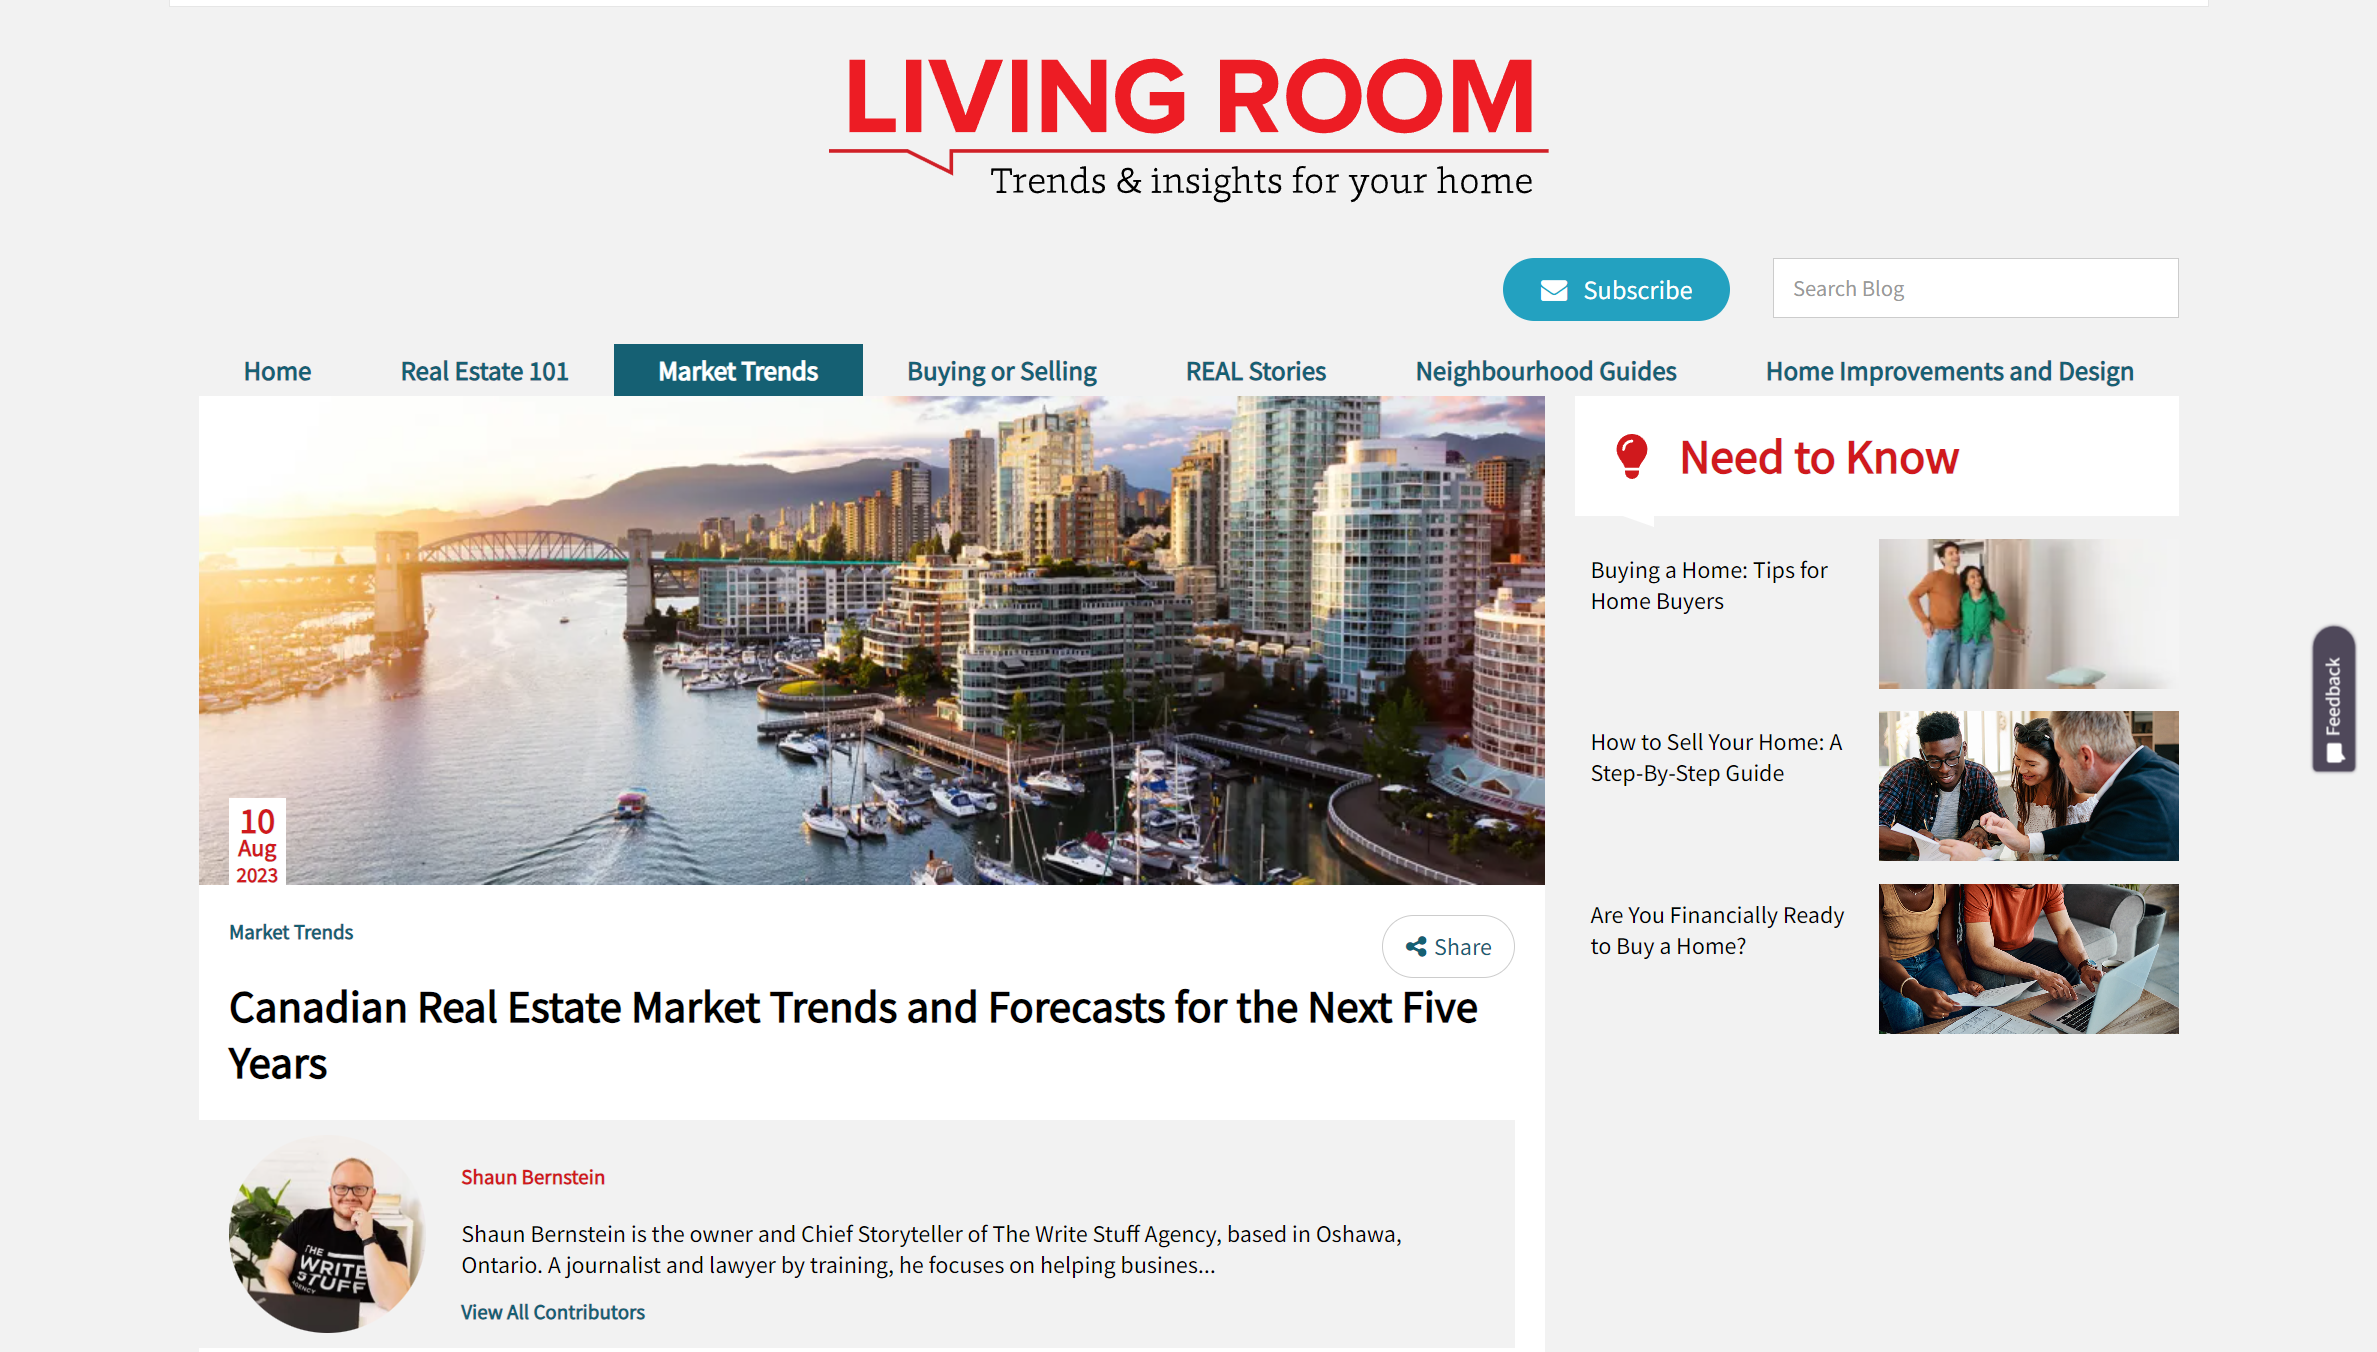 Canadian Real Estate Market Trends and Forecasts for the Next Five Years